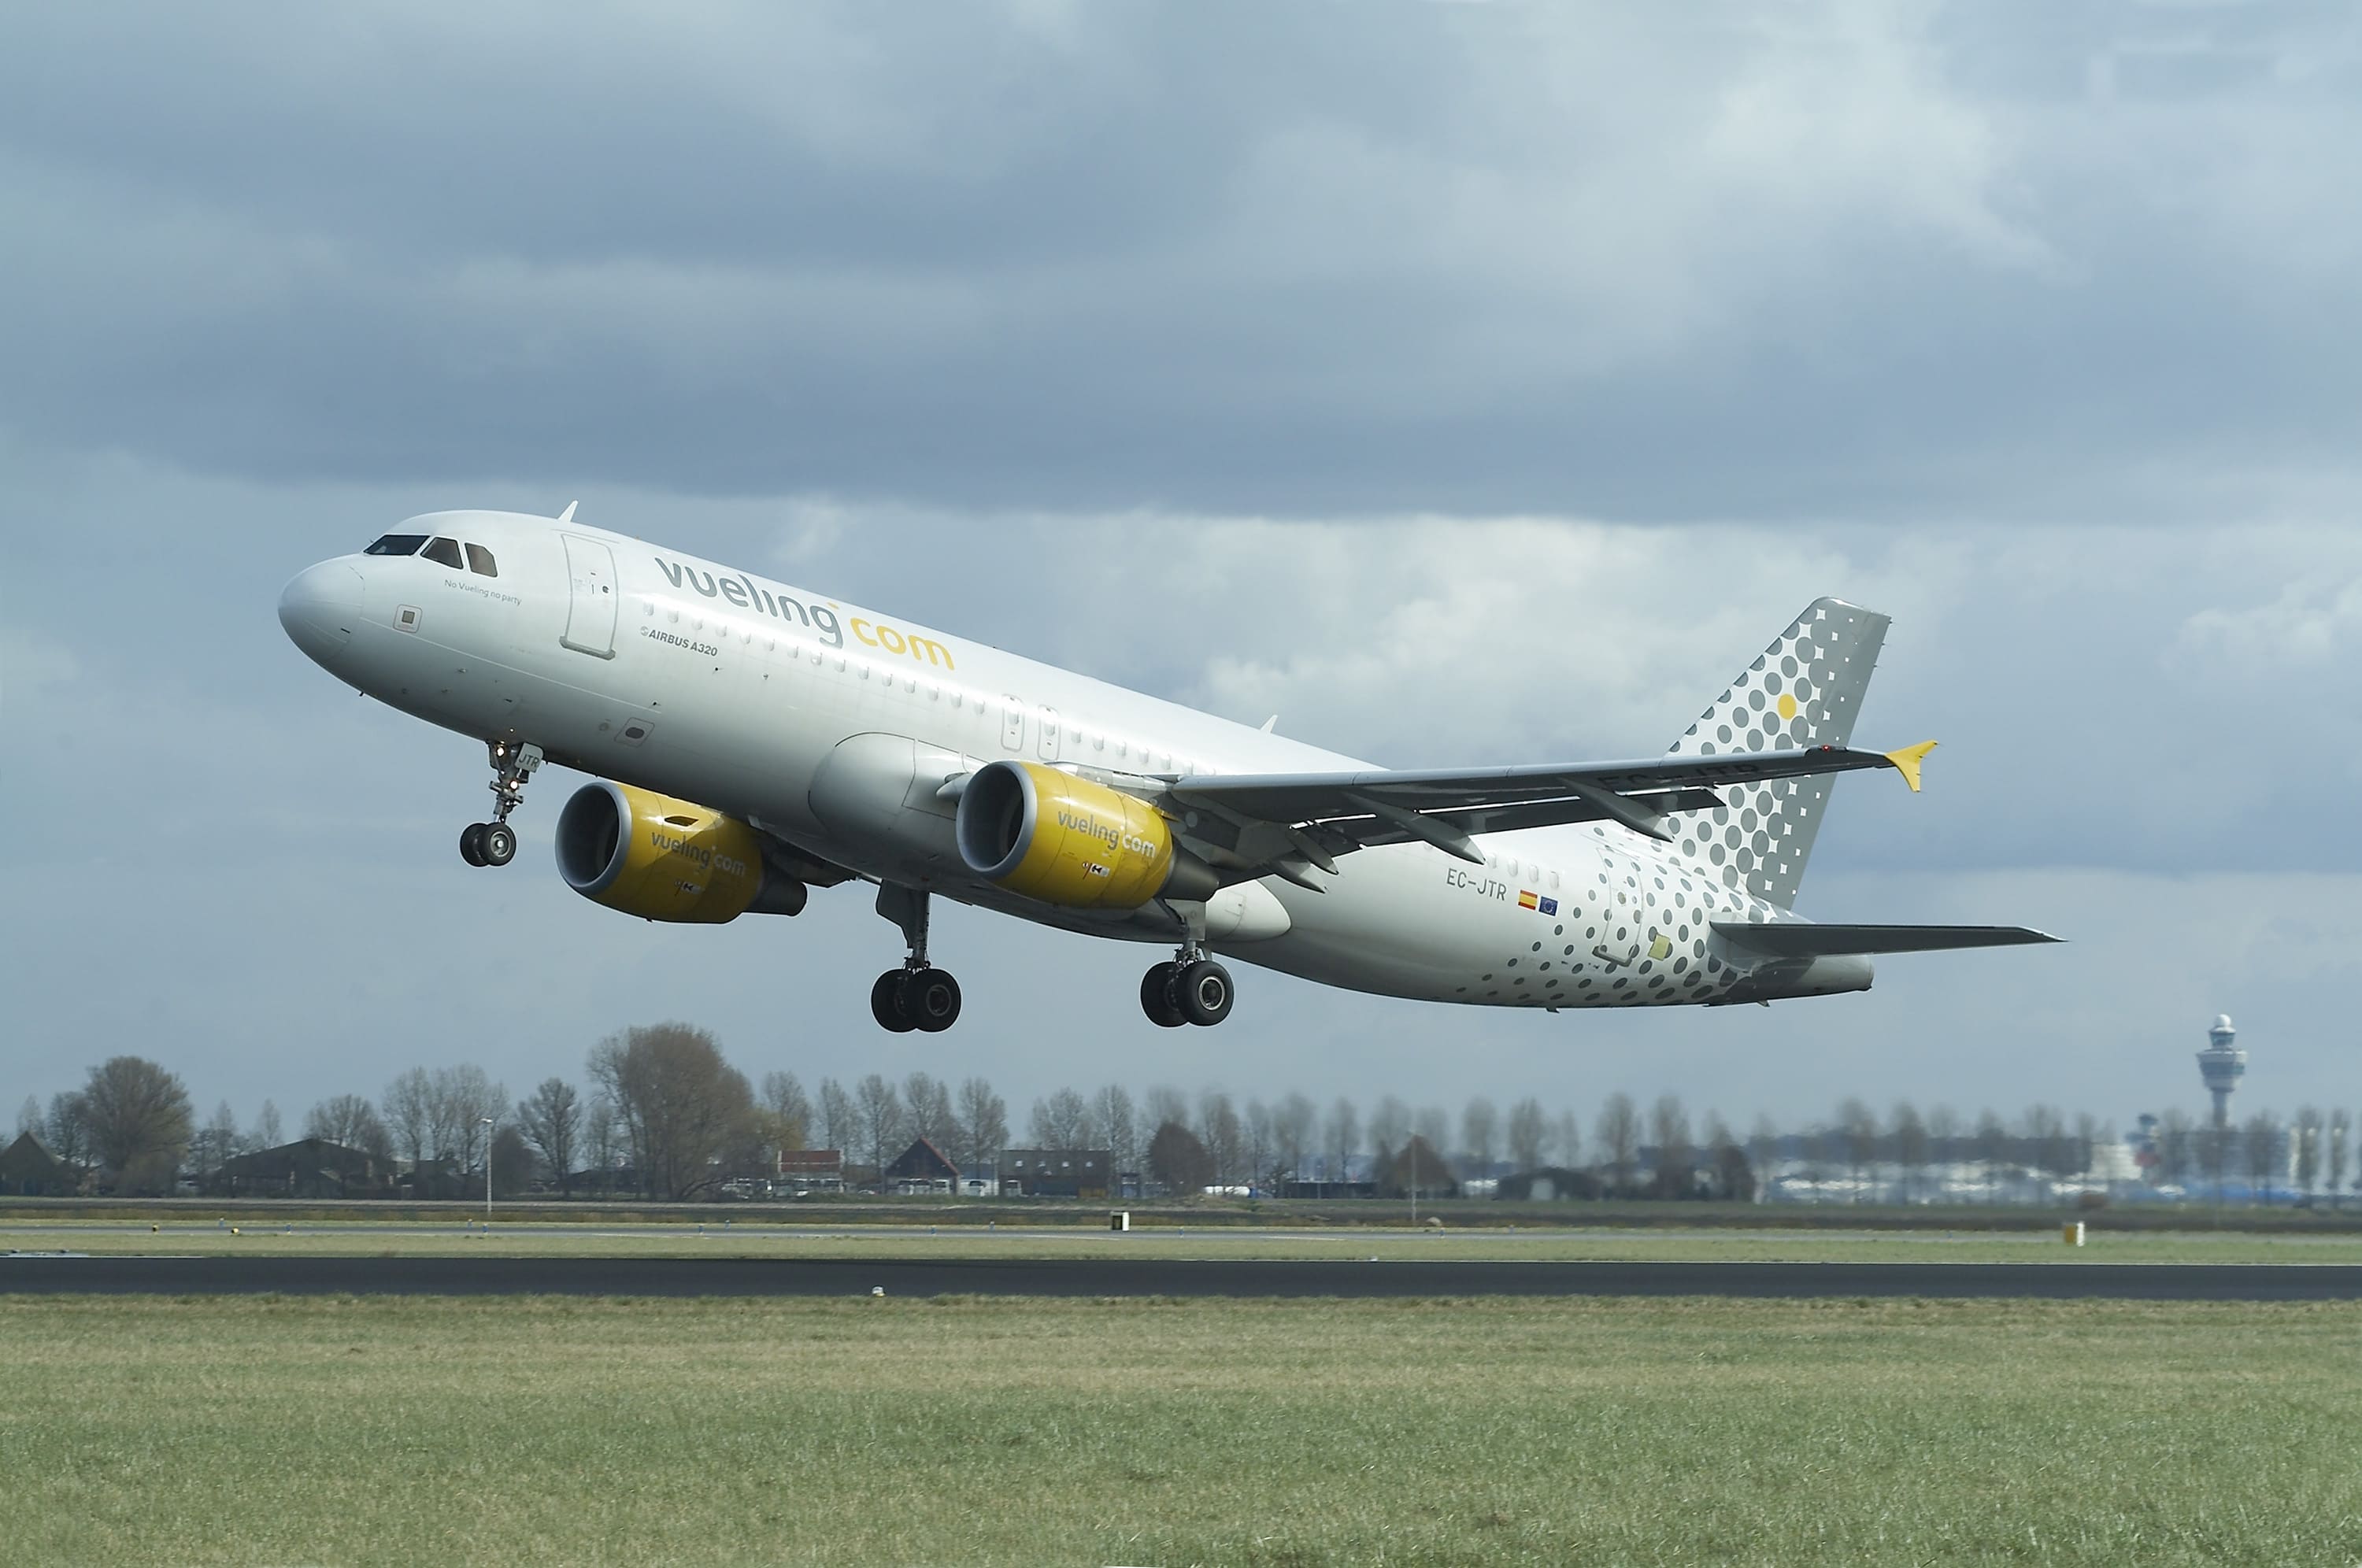 A Vueling Airbus A320 airplane taking off